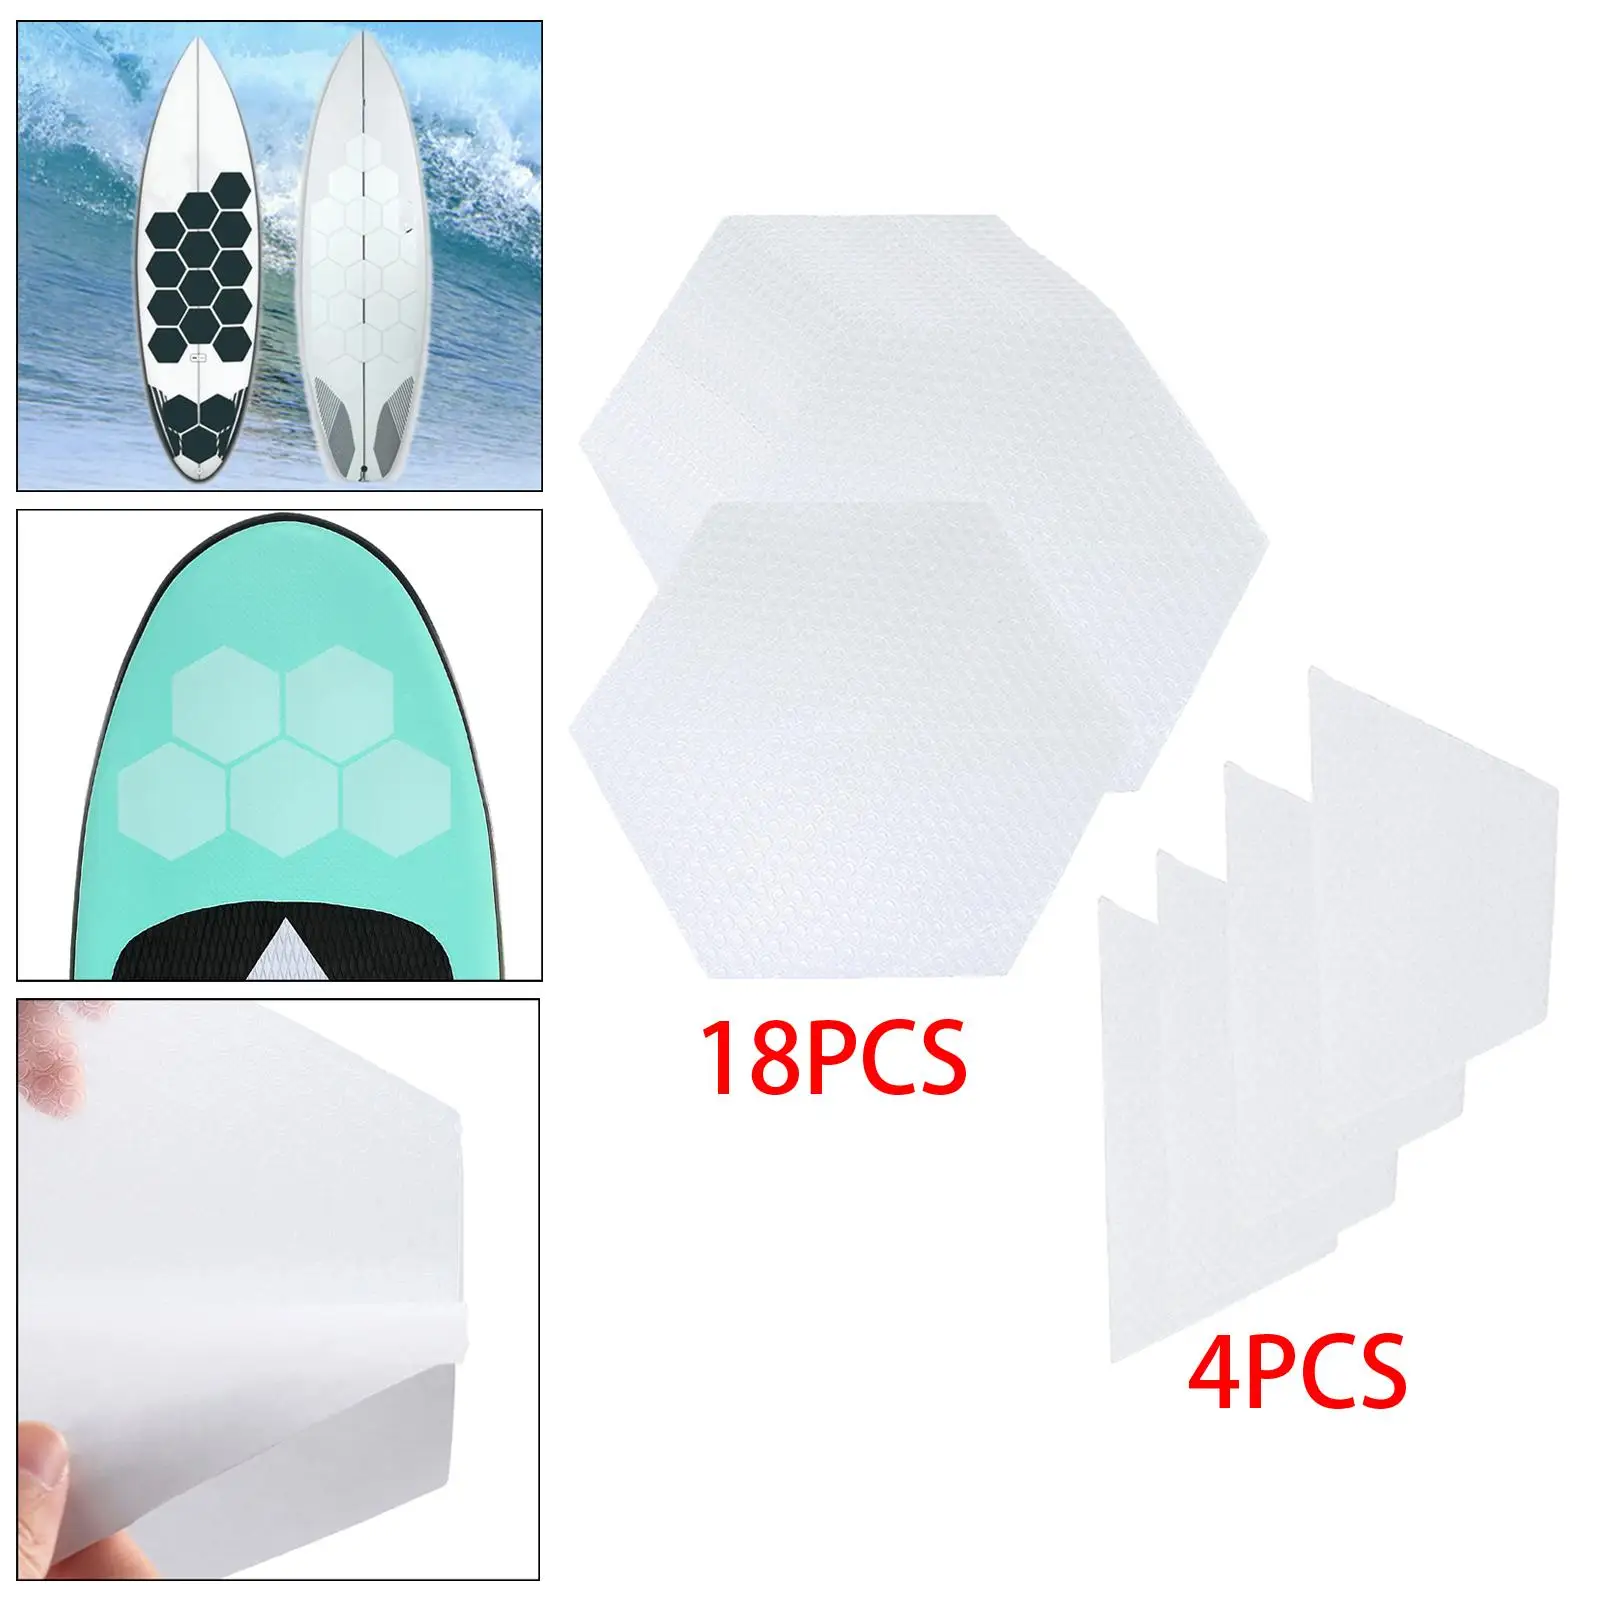 Surfboard Traction Pads Foot Strap Surfpad Non Slip Mat Honeycomb Hole Adhesive Surf Deck Pads Surfing Accessory White